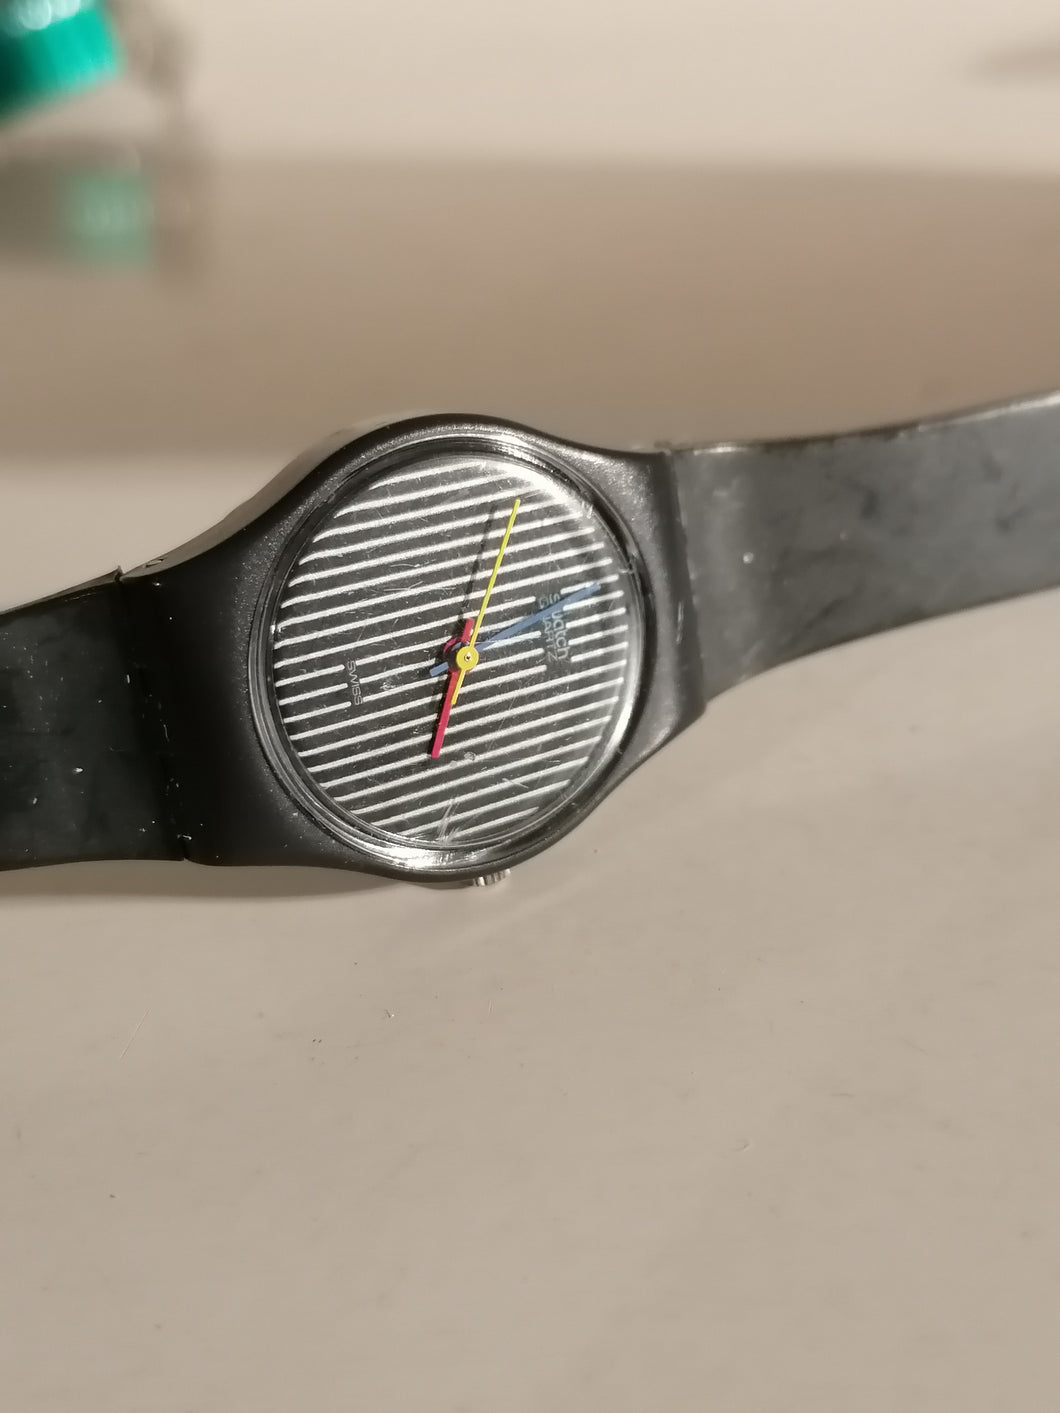 Swatch 1984 miss Chanel fonctionne